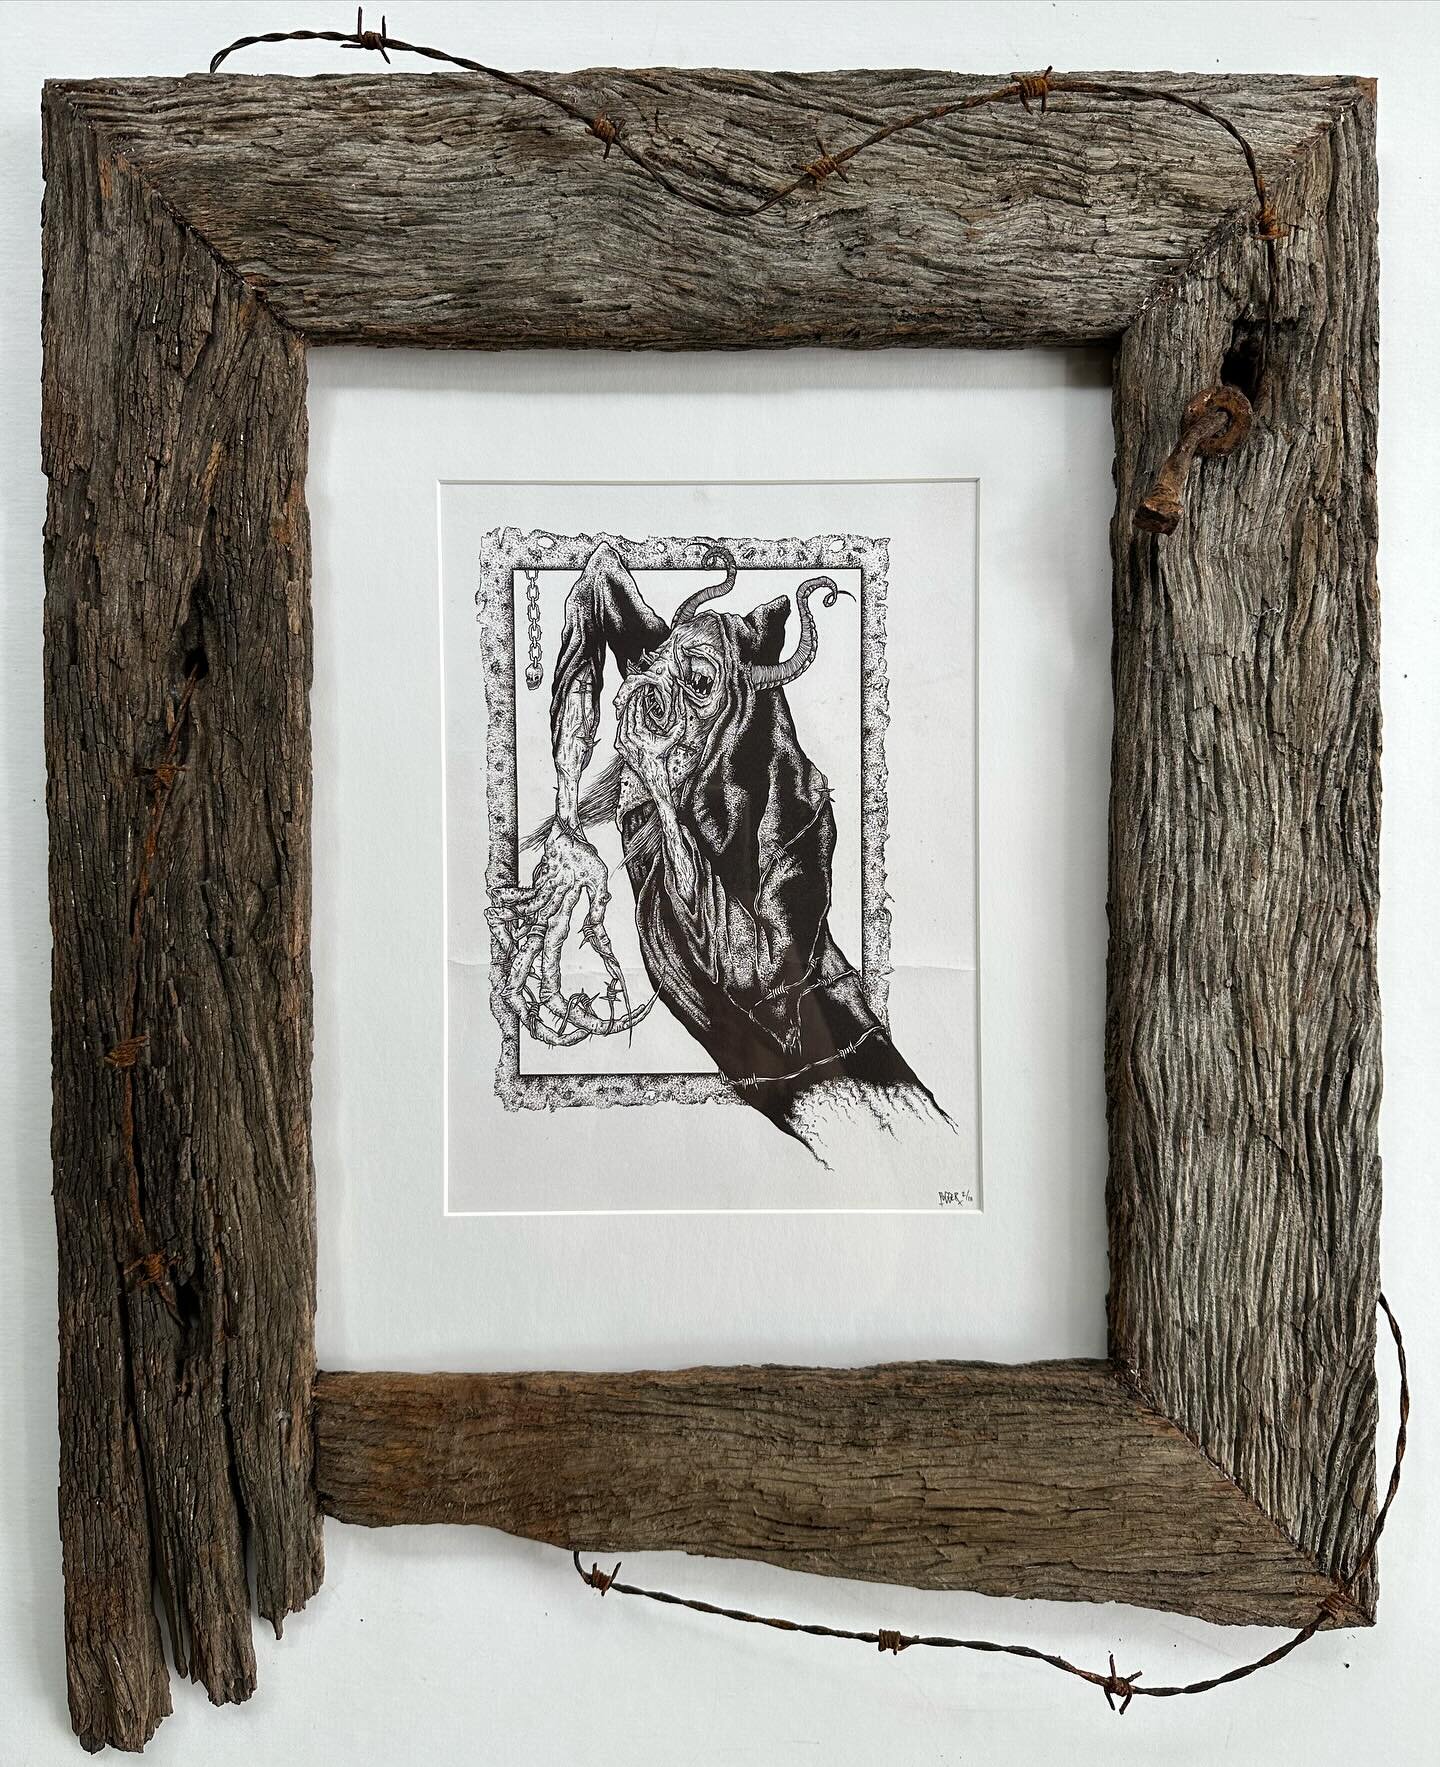 Using the deliciousness of these old fence posts, we have created a frame for this original ink drawing, perfectly in keeping with the style of the artwork. Decaying timber and rusty wire taking a lead role, a far cry from some of our usual shiny gol